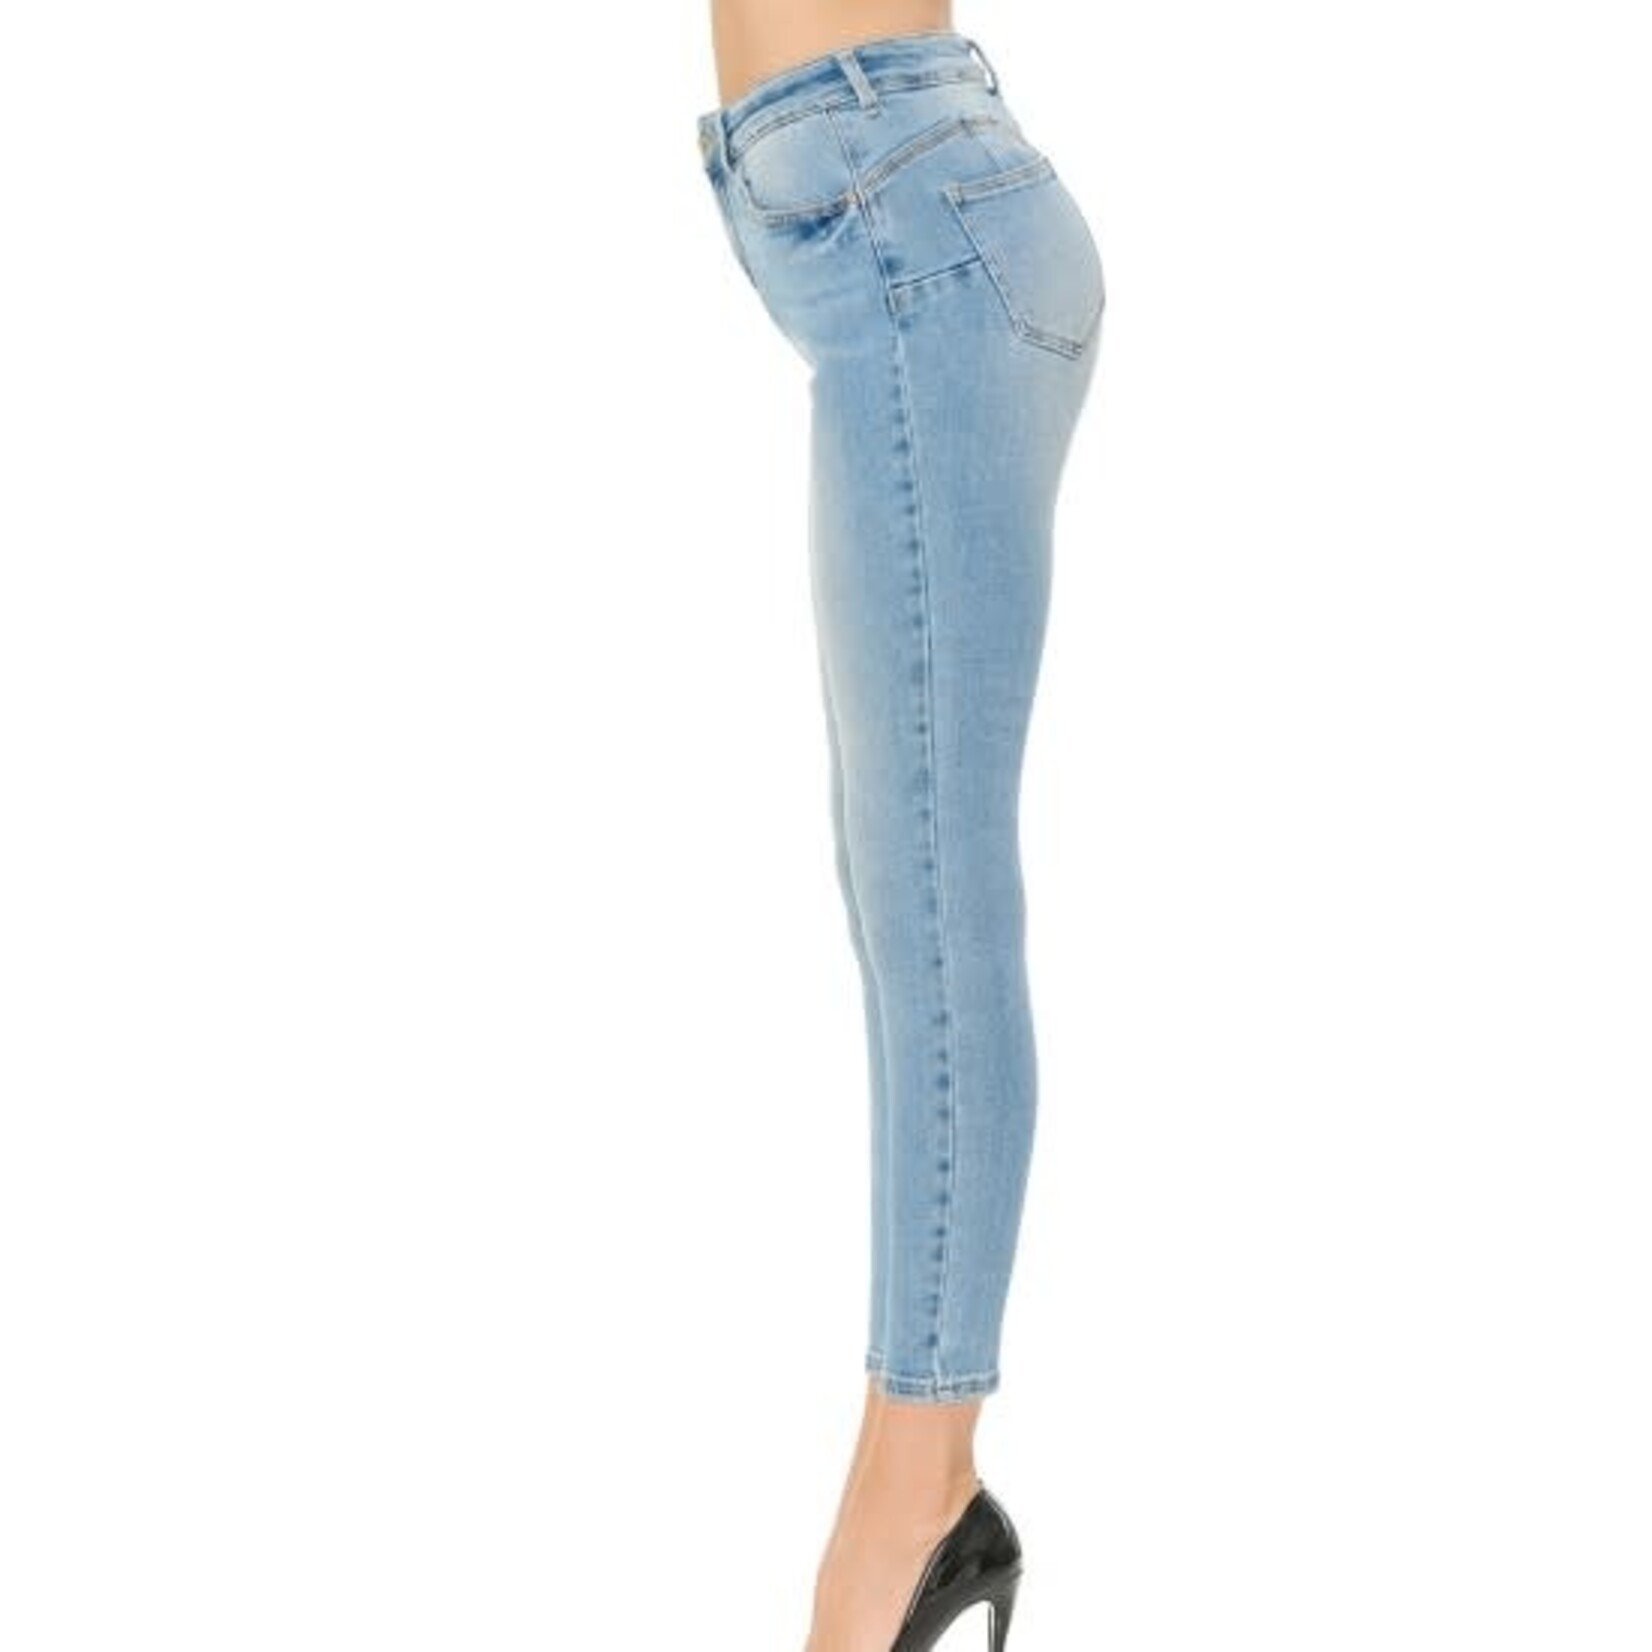 Wax Jeans Wax Jeans - Push-Up Vintage Classic 5 Pocket Ankle Jeans - 90800